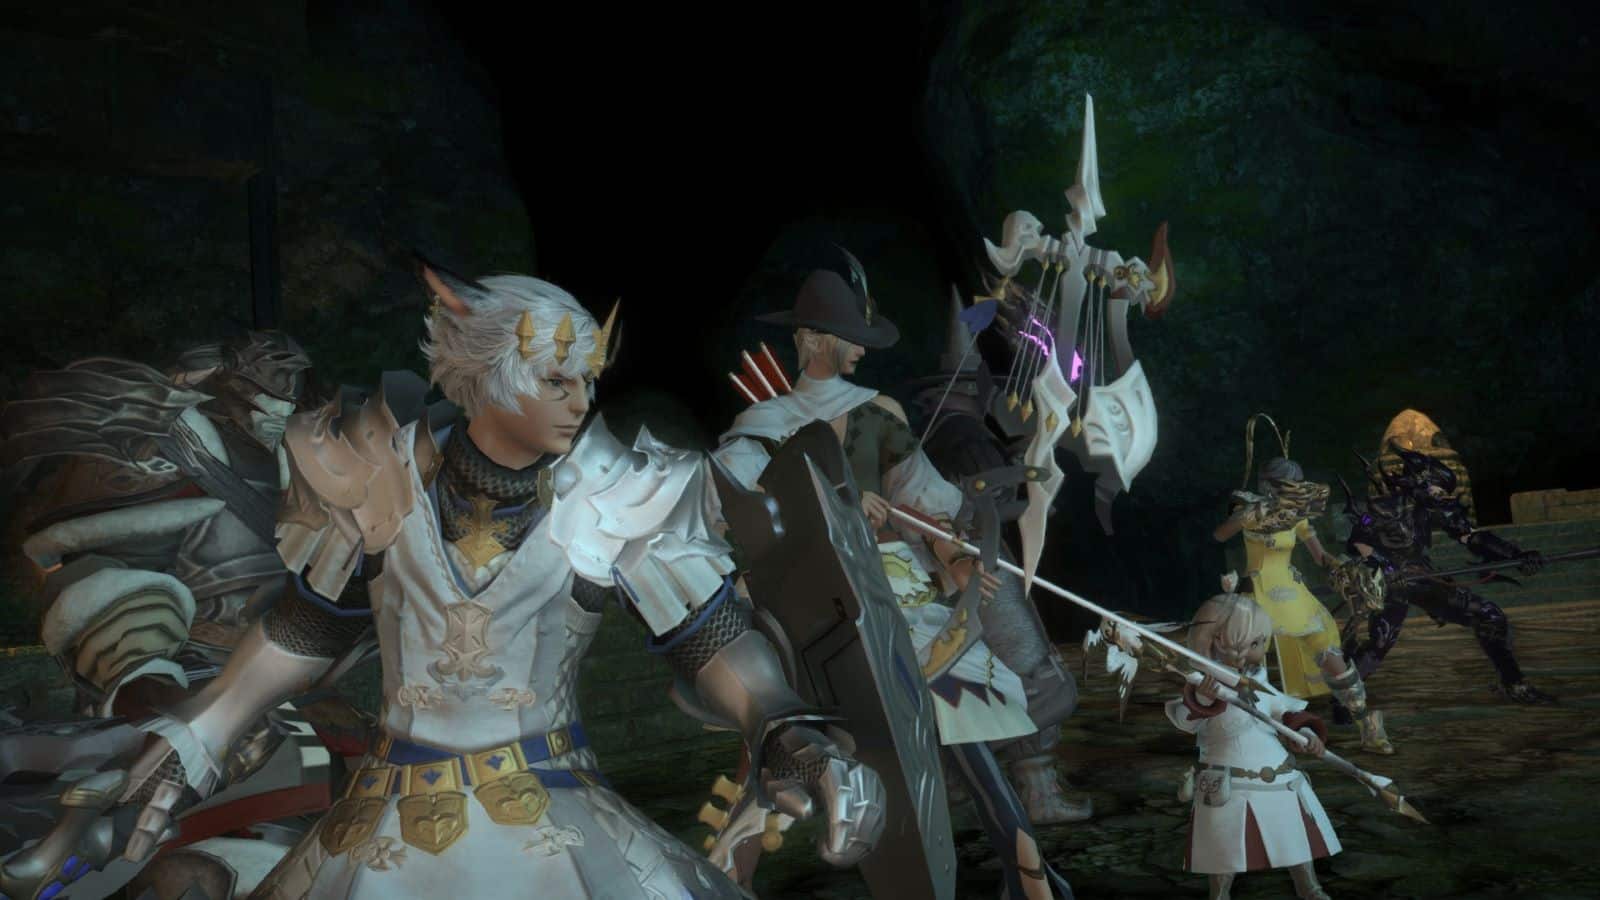 Final Fantasy 14 screenshot showing a group of characters preparing for battle